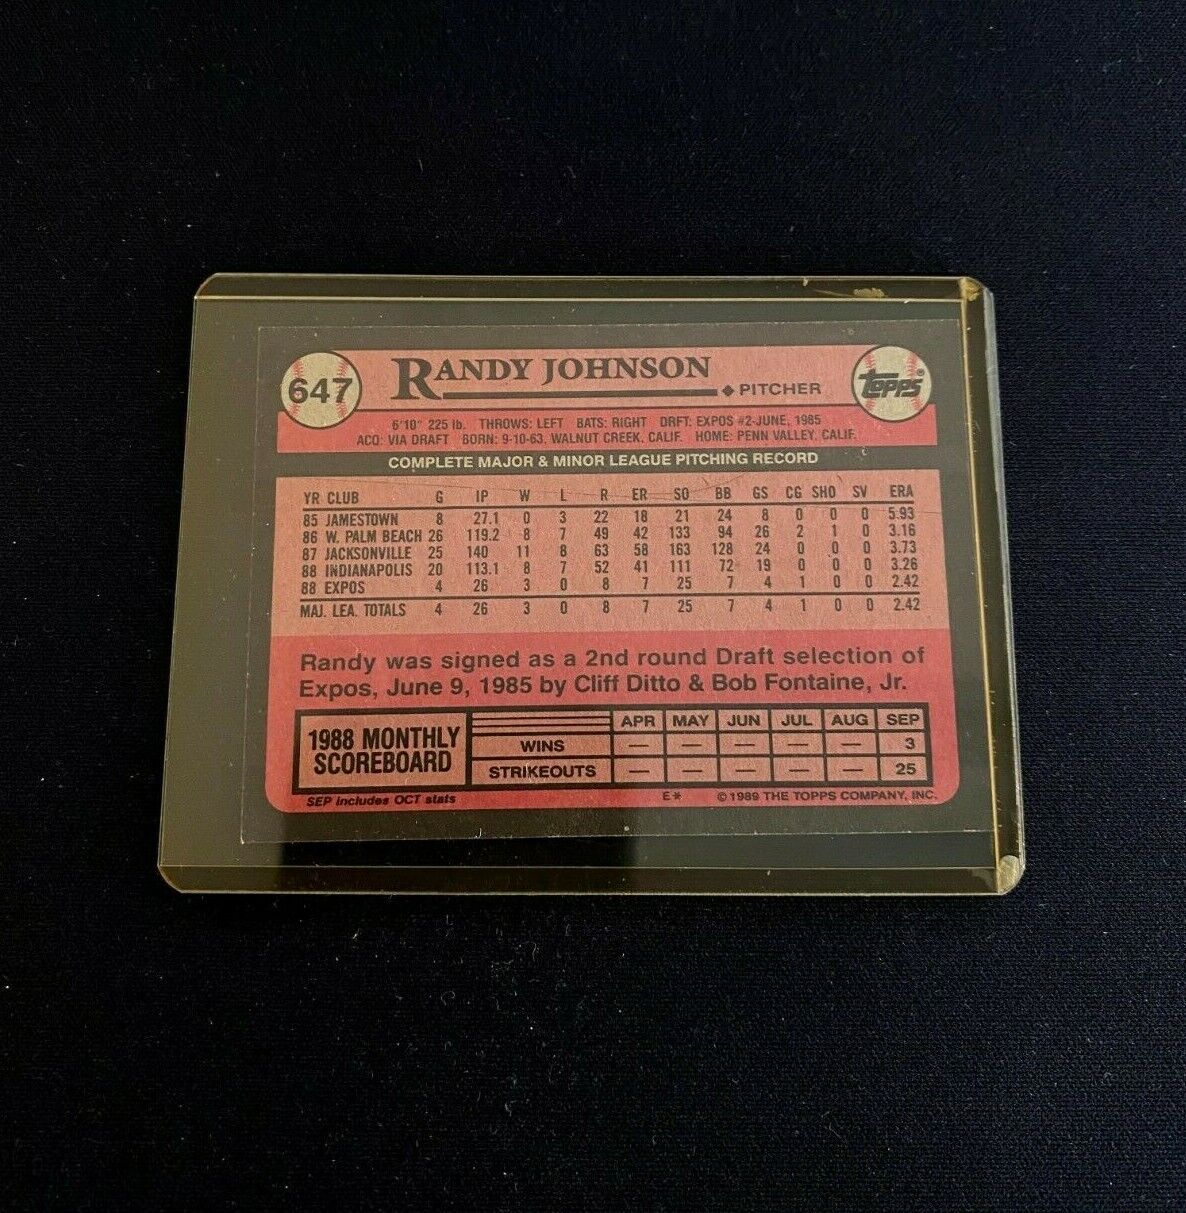 1989 Topps Randy Johnson Rookie Card (GREAT CONDITION!)